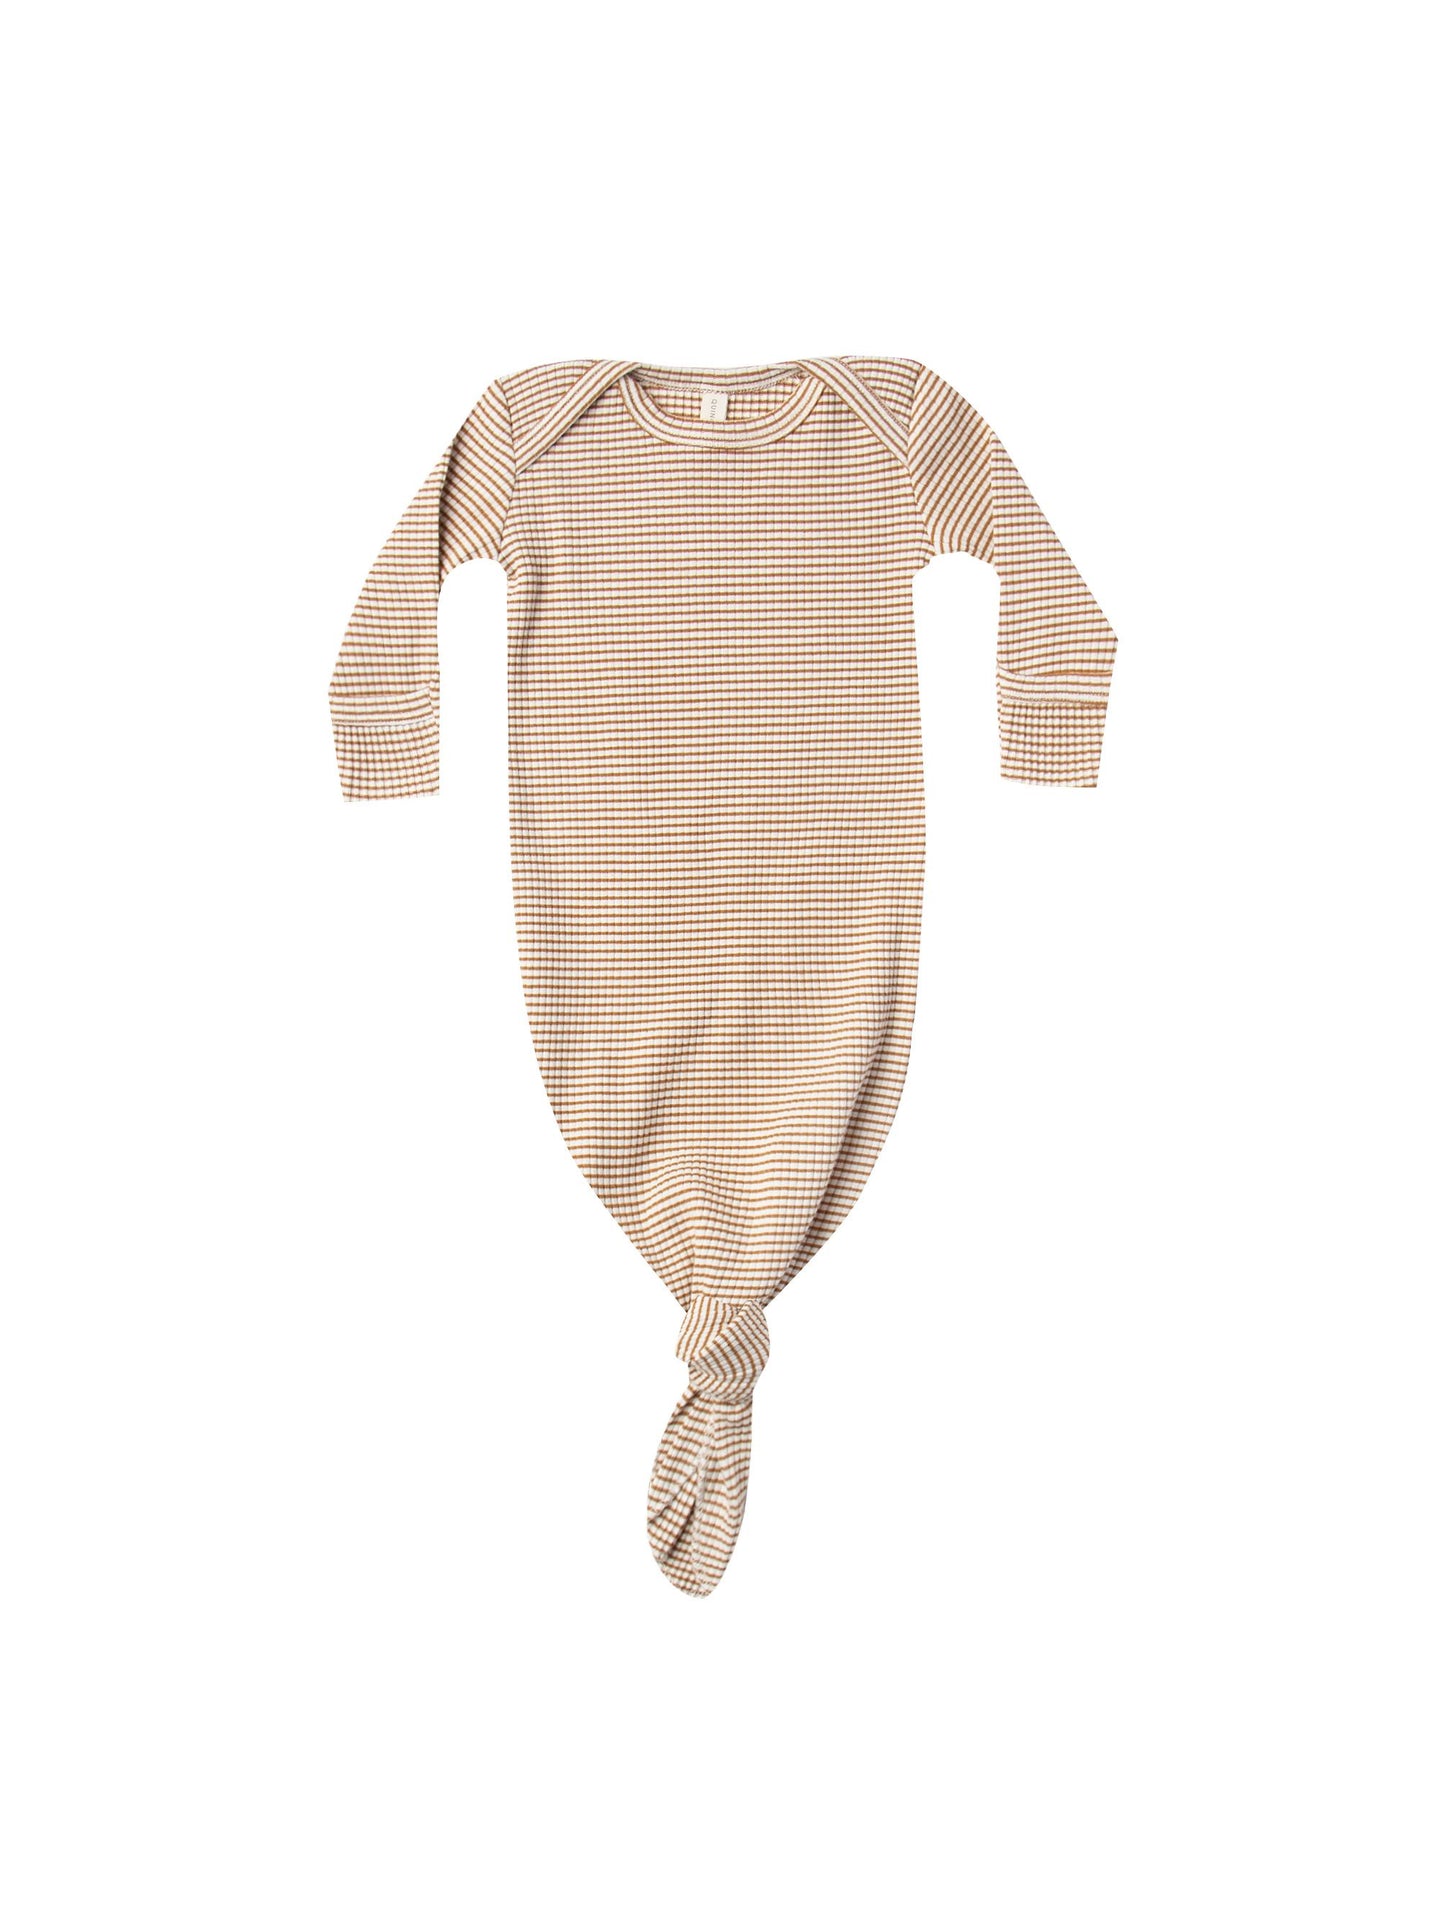 Quincy Mae - Organic Ribbed Knotted Baby Gown - Walnut Stripe